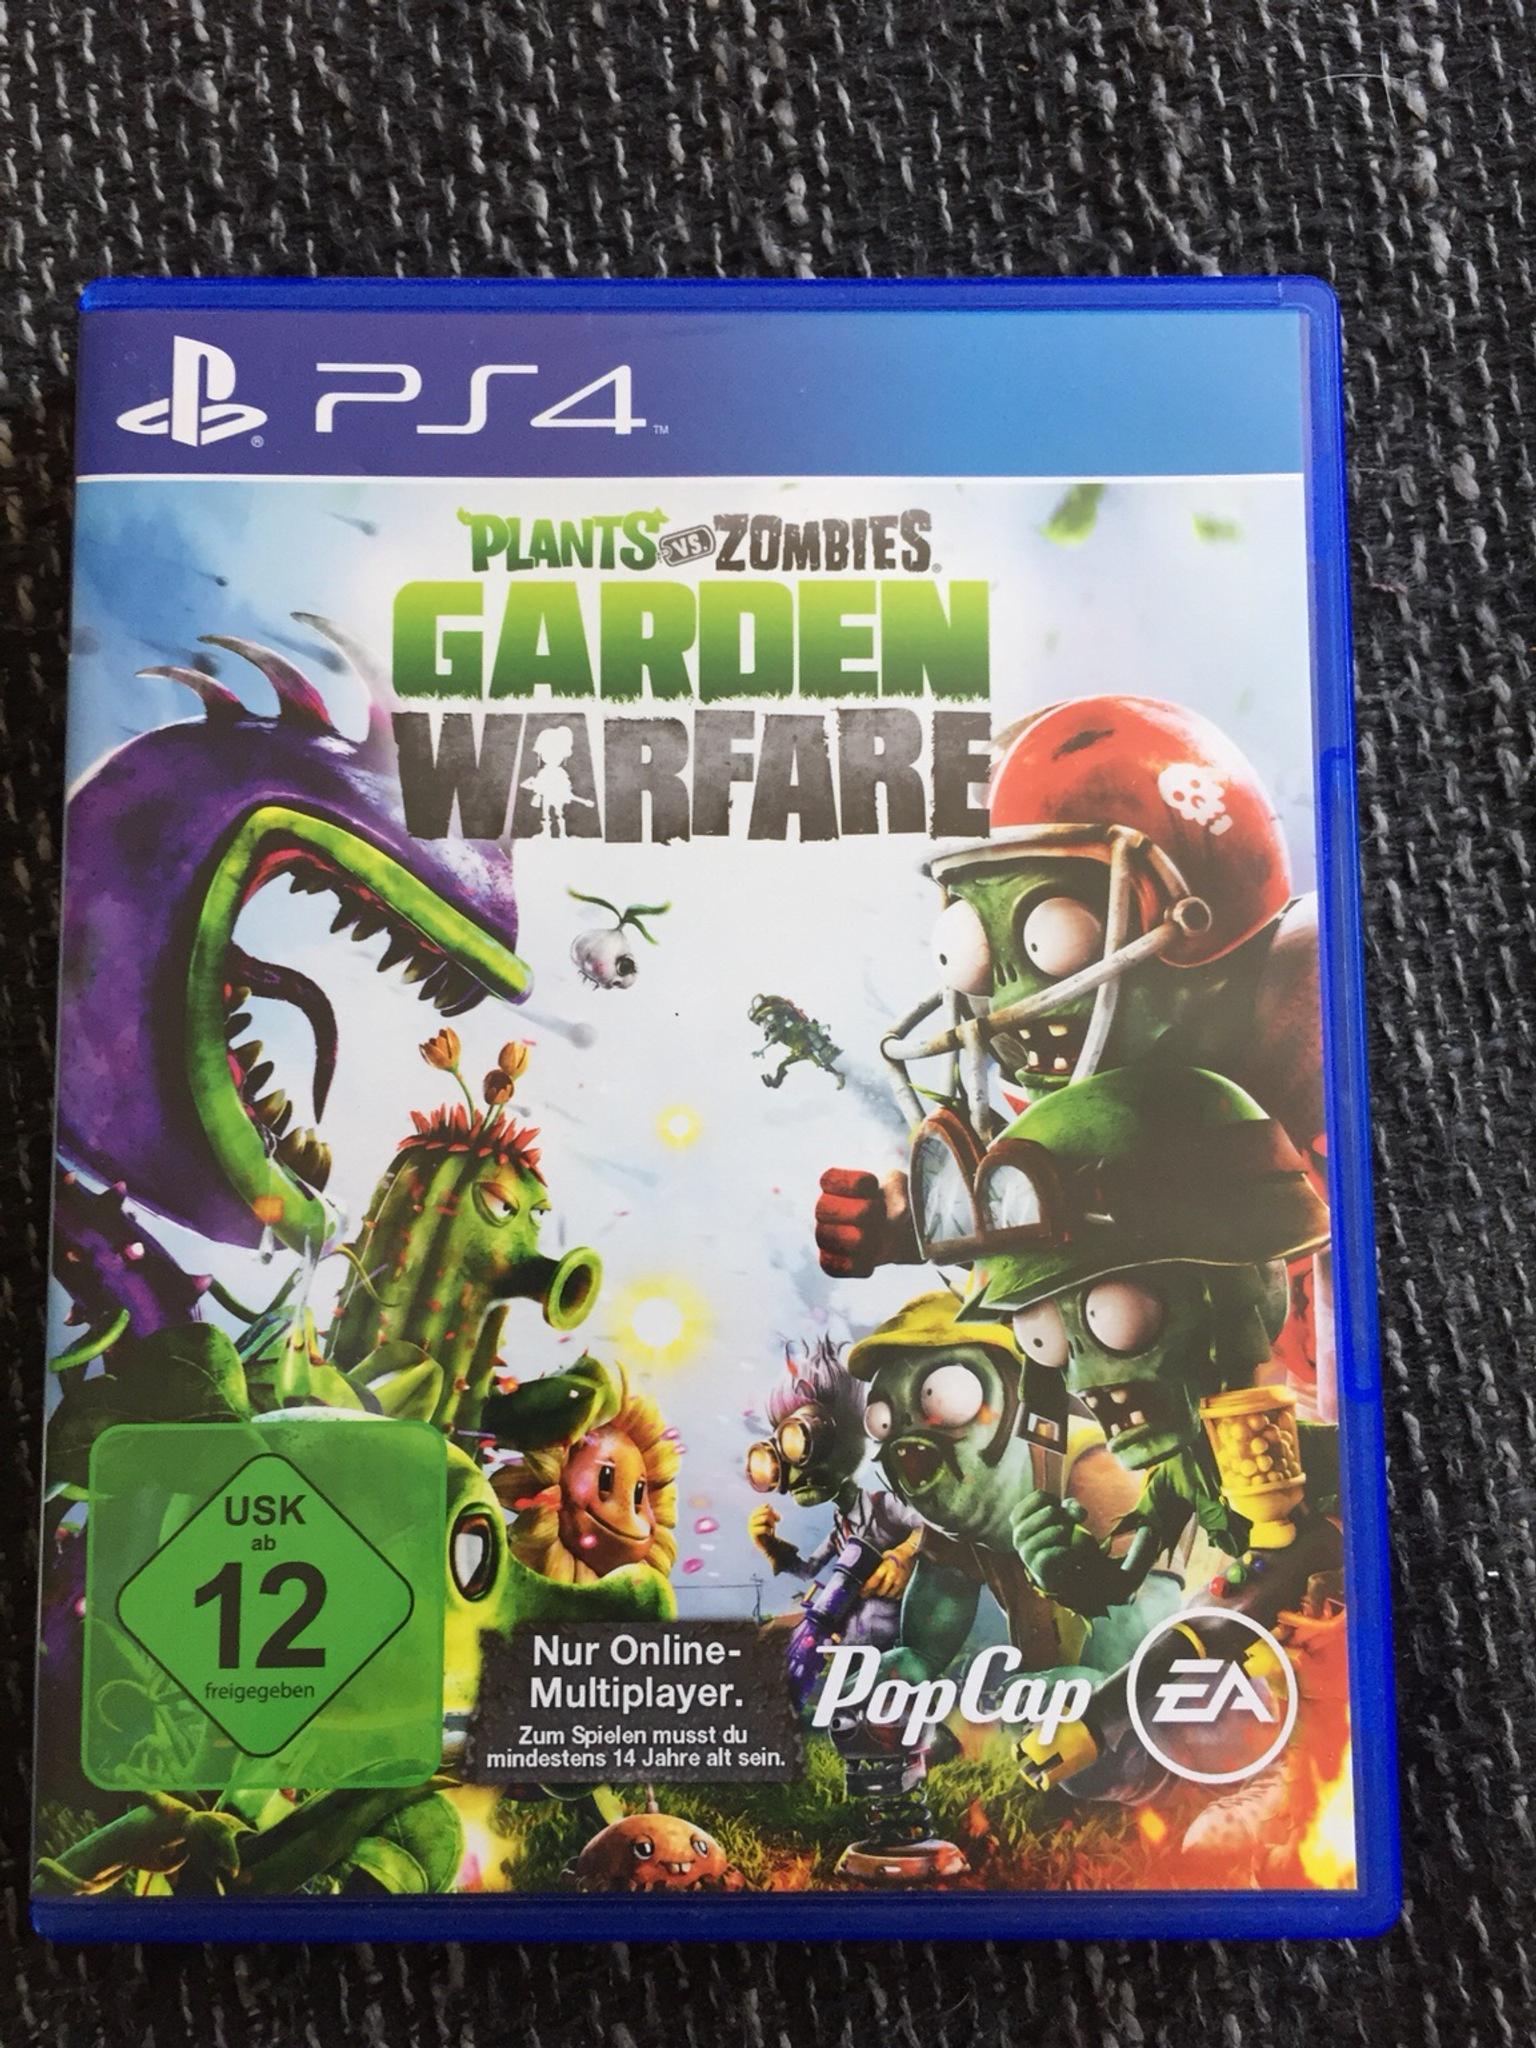 Ps4 Plants Vs Zombies Garden Warfare In 99885 Luisenthal For